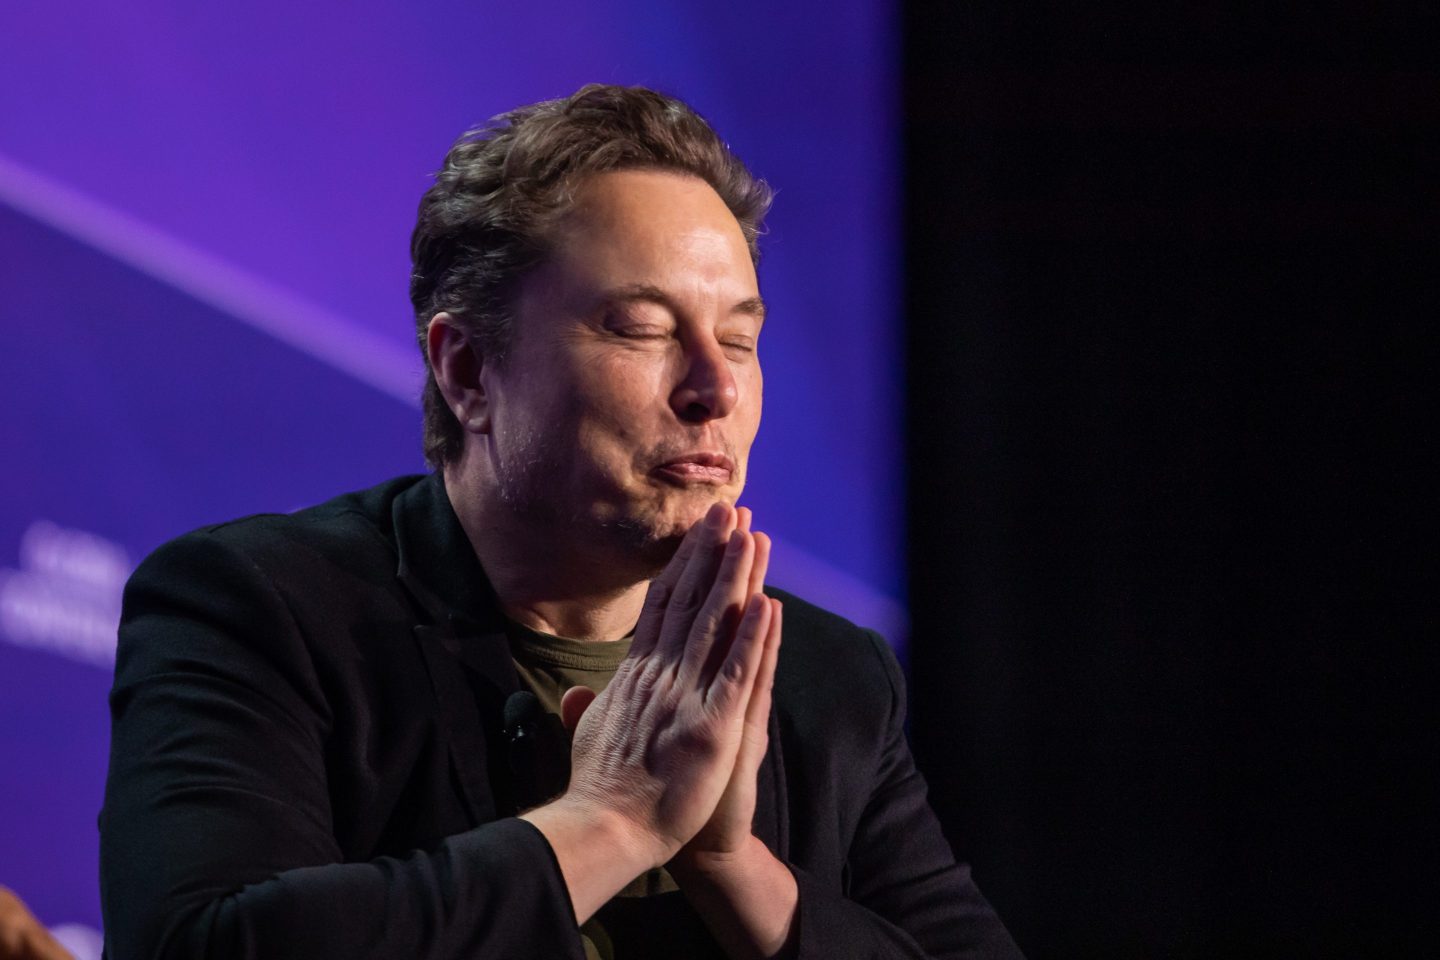 Tesla's board of directors is urging shareholders to approve a $45 billion pay package for CEO Elon Musk.